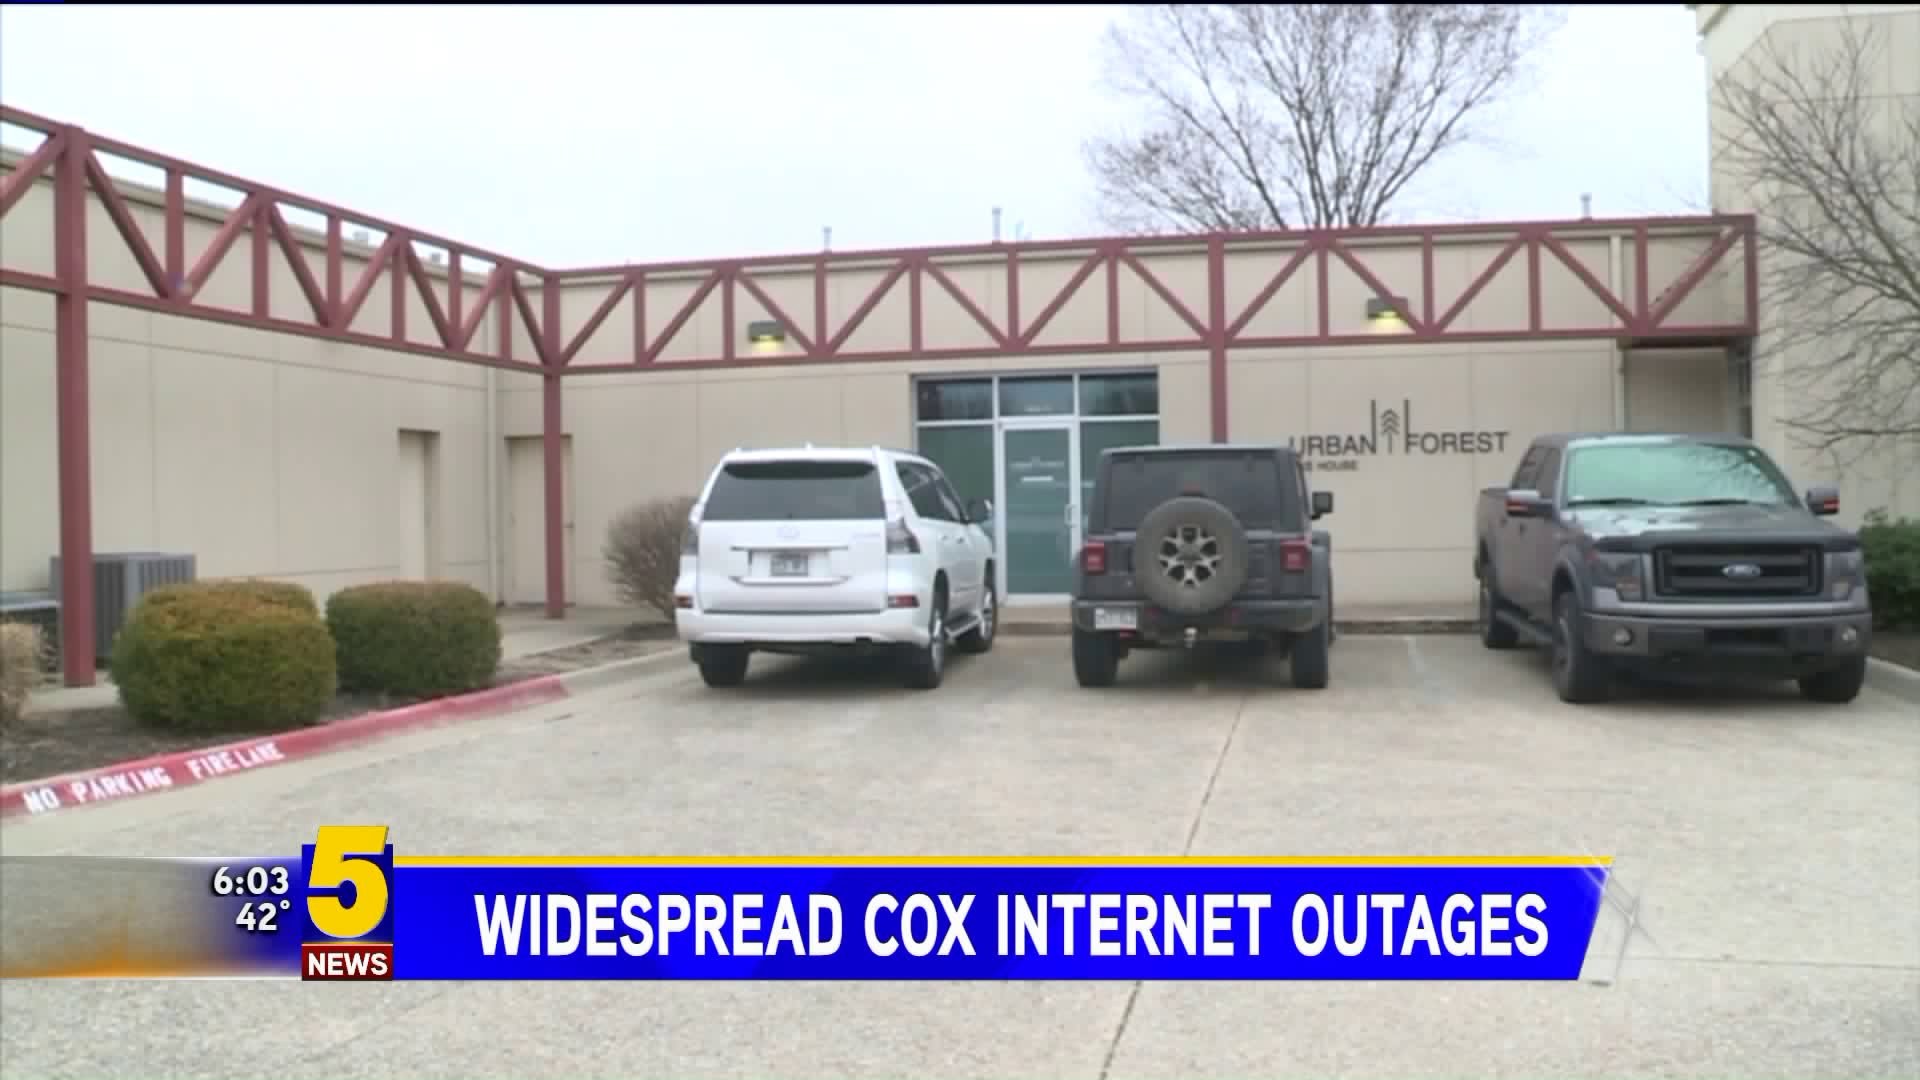 Widespread Cox Internet Outages